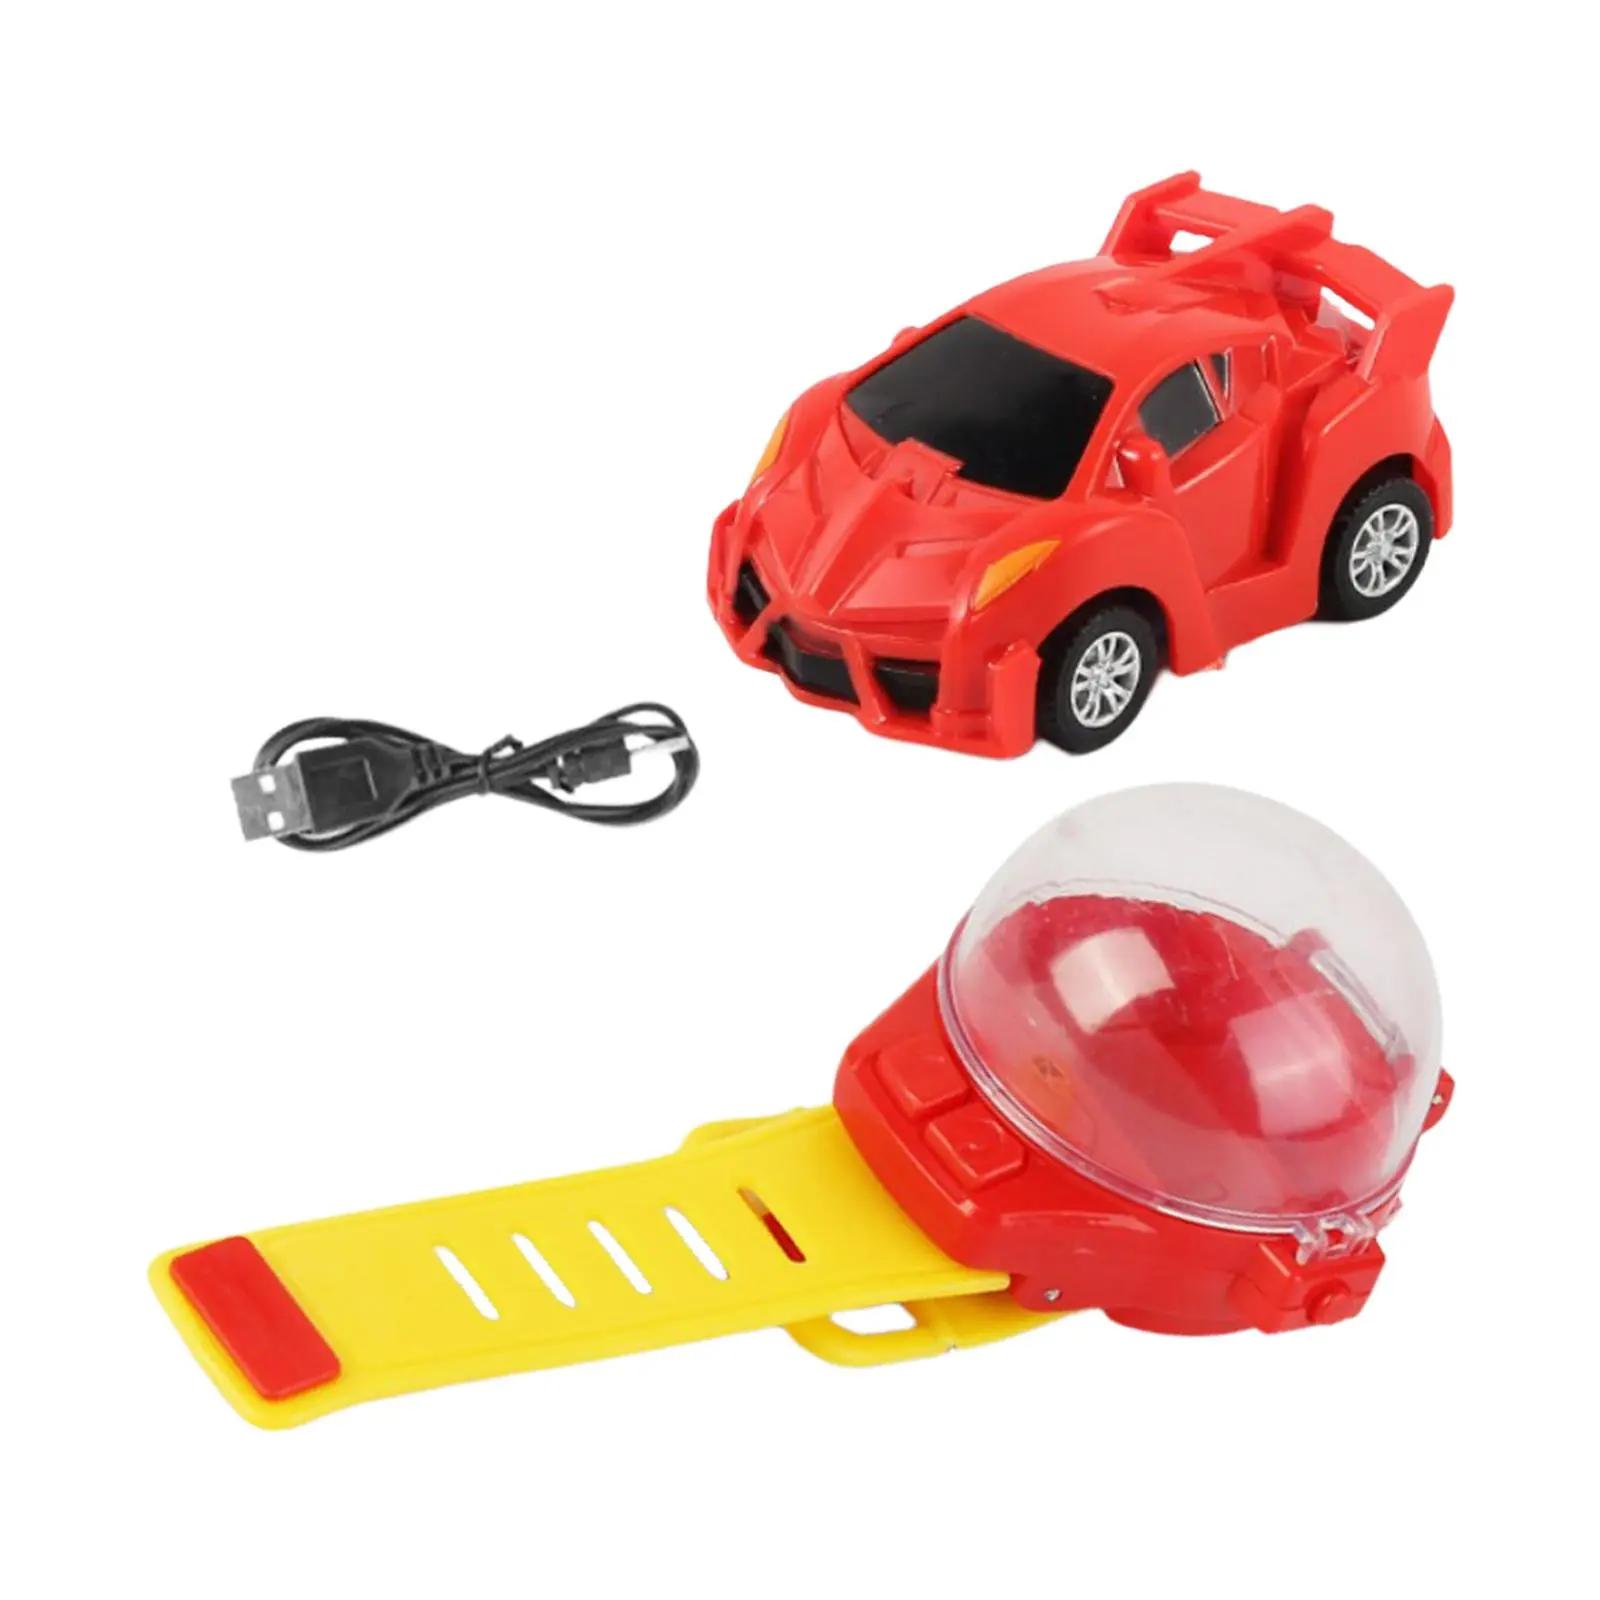 Wrist Watch Remote Control Car: Benefits of the Wristwatch RC Car for Kids and Adults